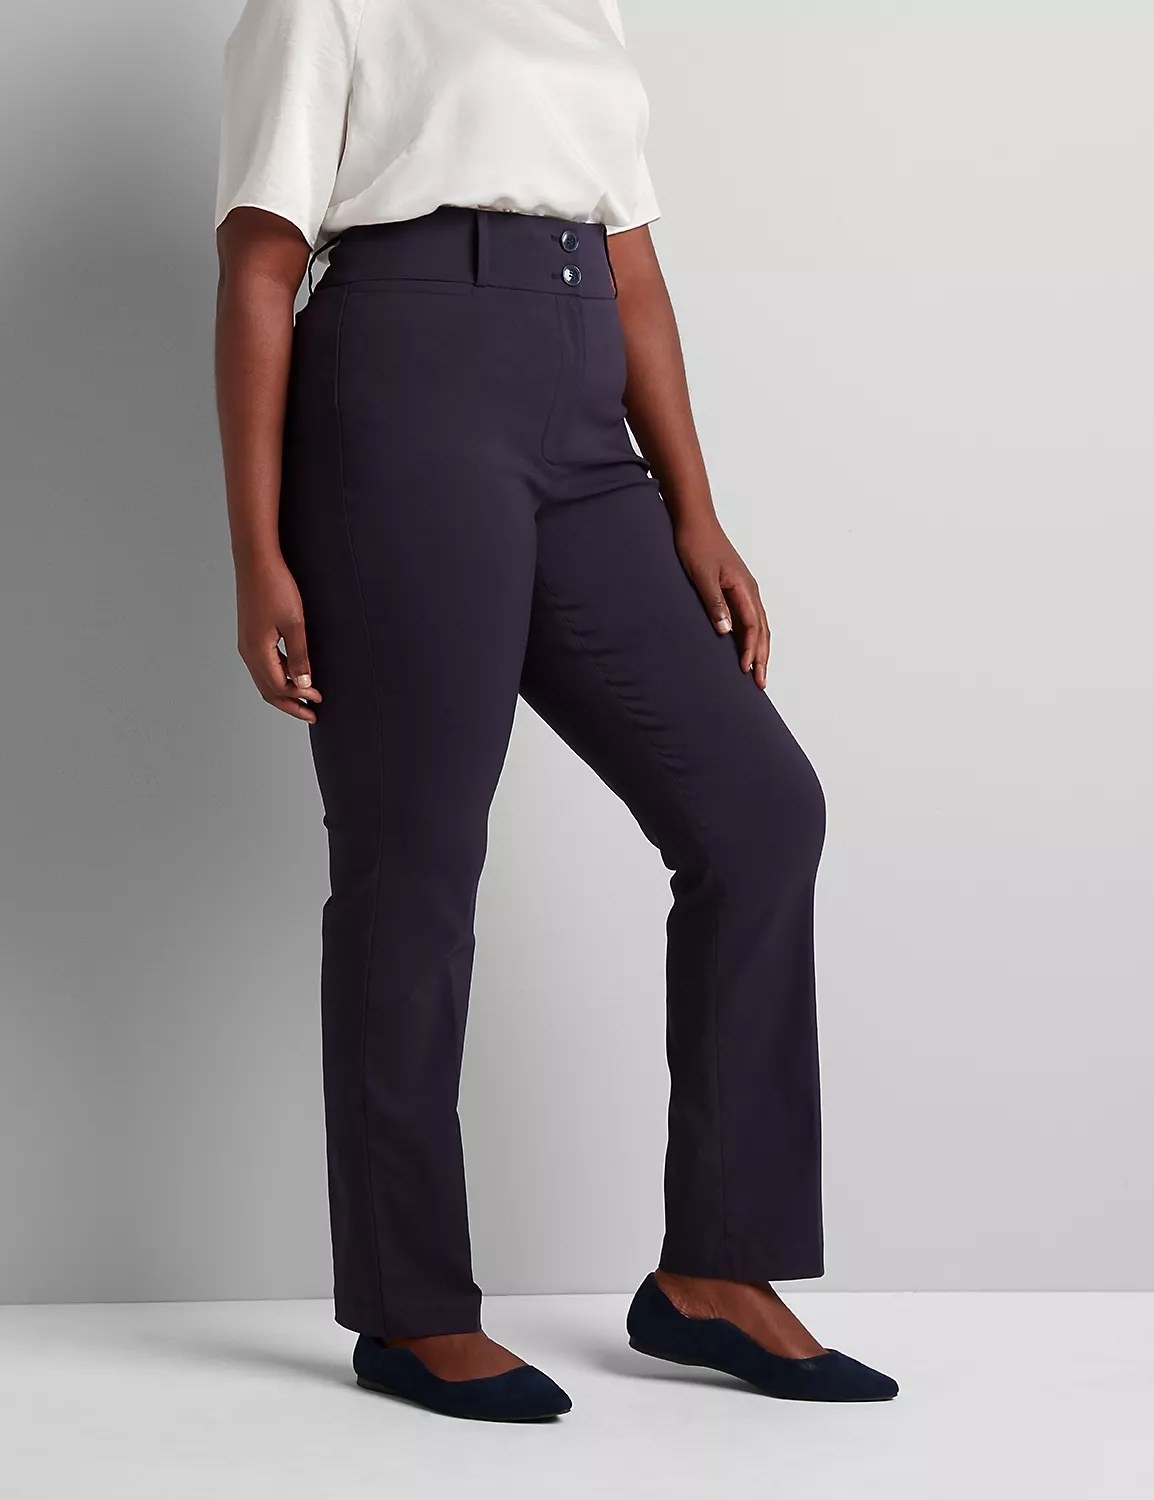 Model wearing navy pants with black shoes and a white top